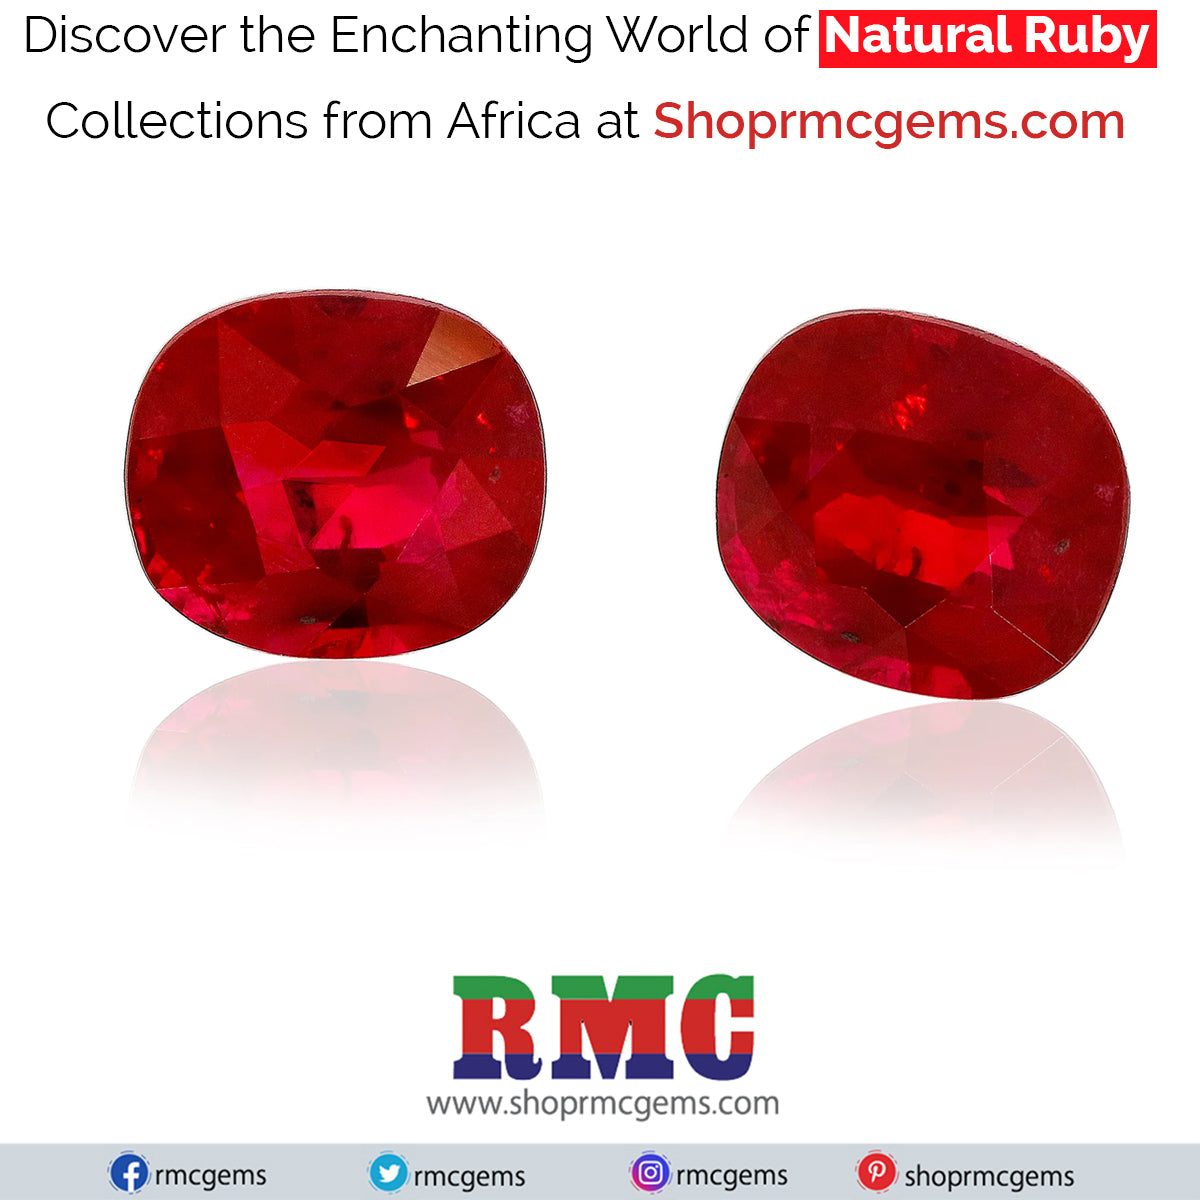 Discover the True Beauty of Nature with Our Exquisite Natural Ruby Collections From Africa at Shoprmcgems.com